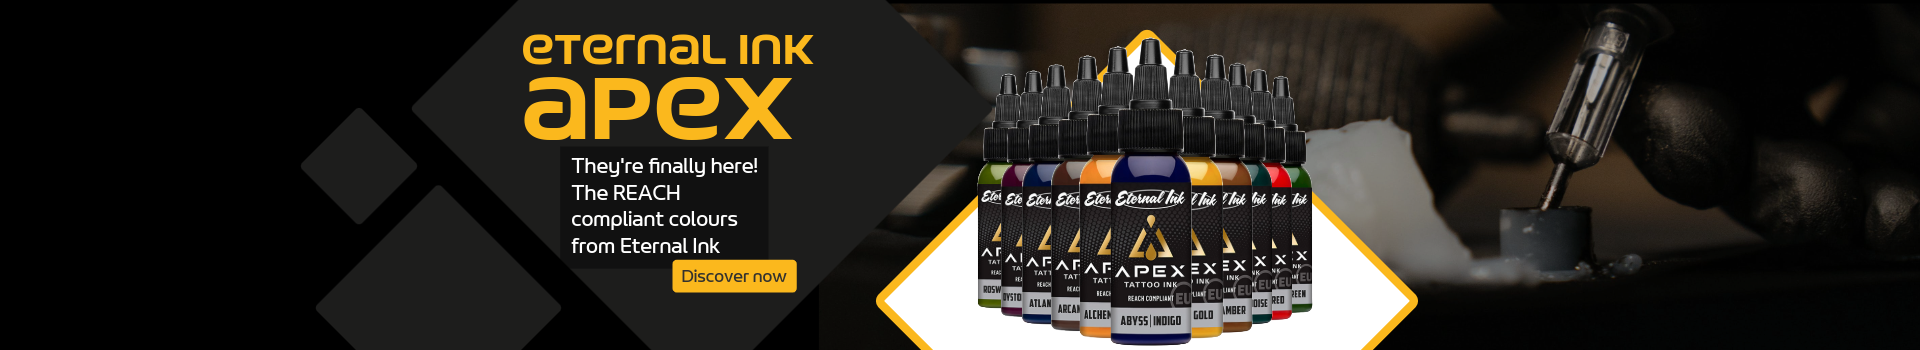 Finally here! Order the new REACH-compliant Apex colour range from Eternal Ink now.